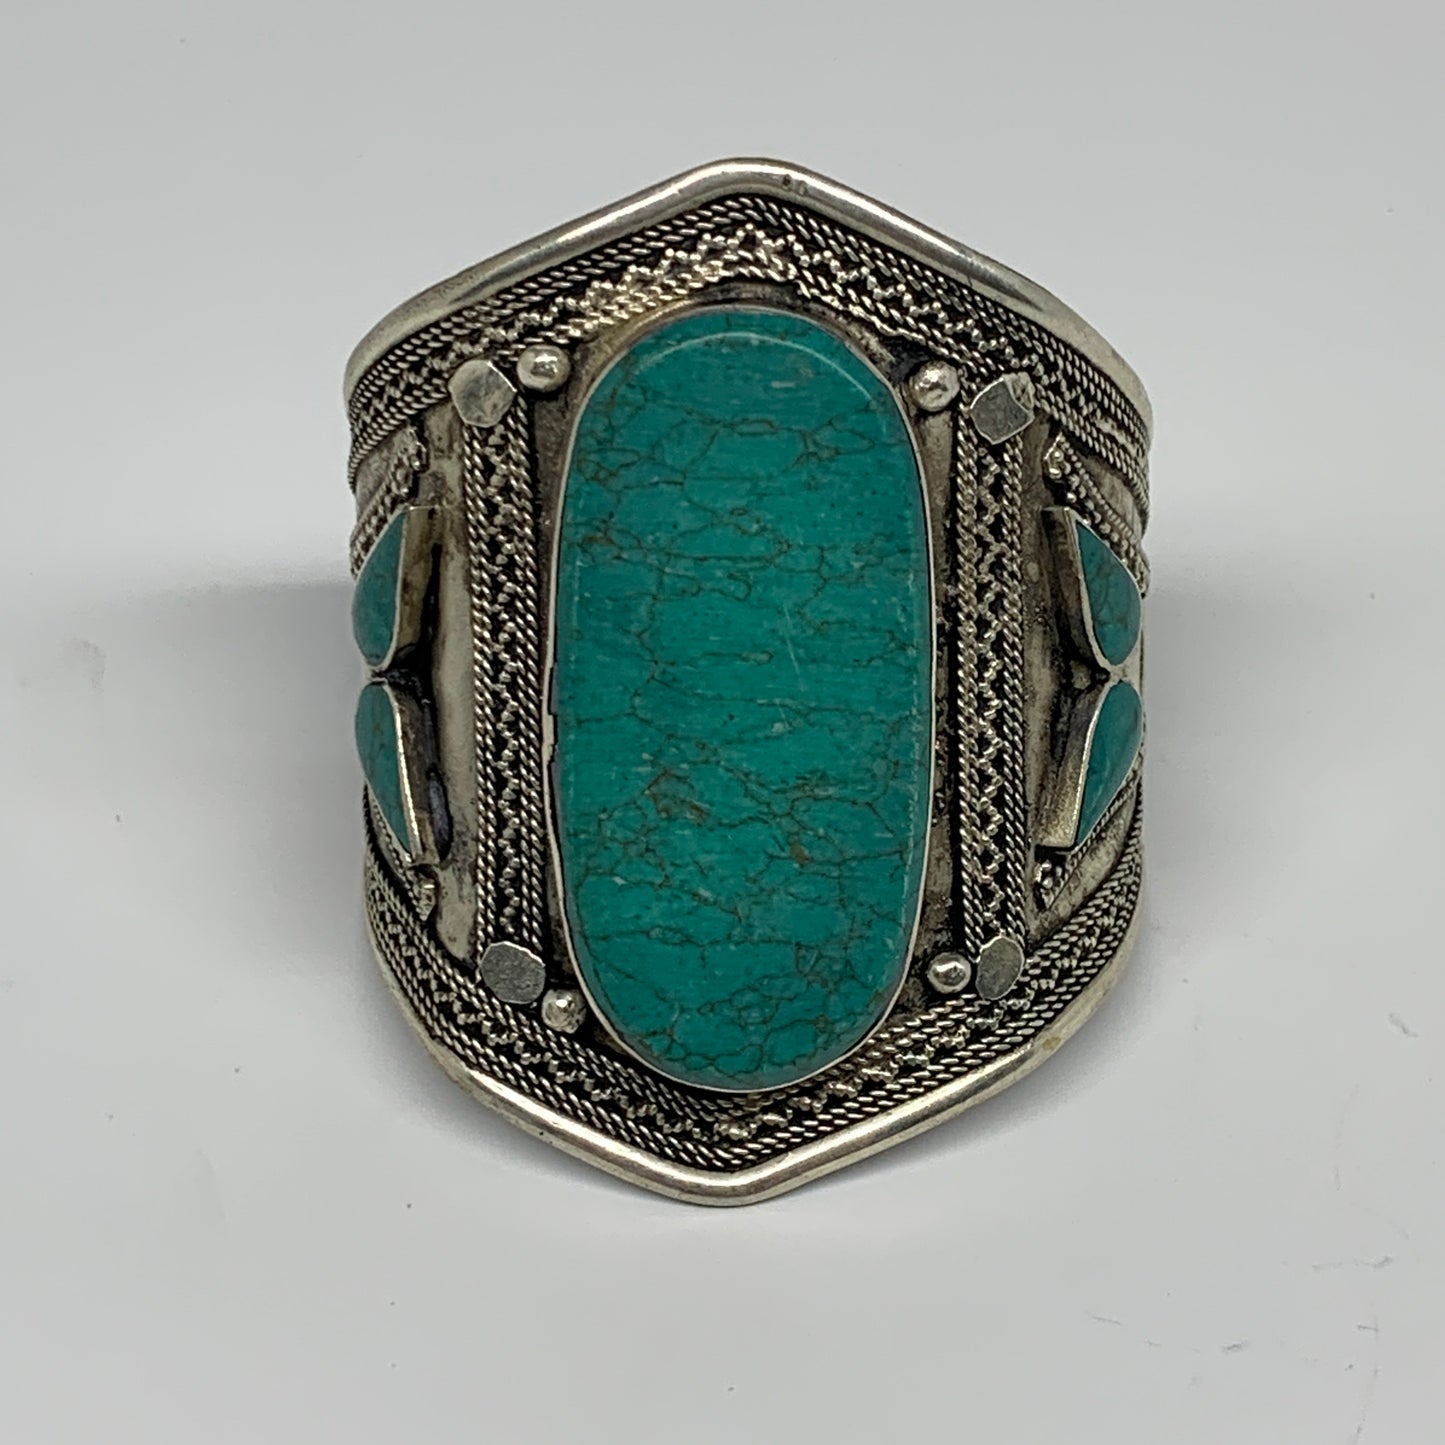 59g, Vintage Reproduced Afghan Turkmen Synthetic Turquoise Cuff Bracelet, B13214